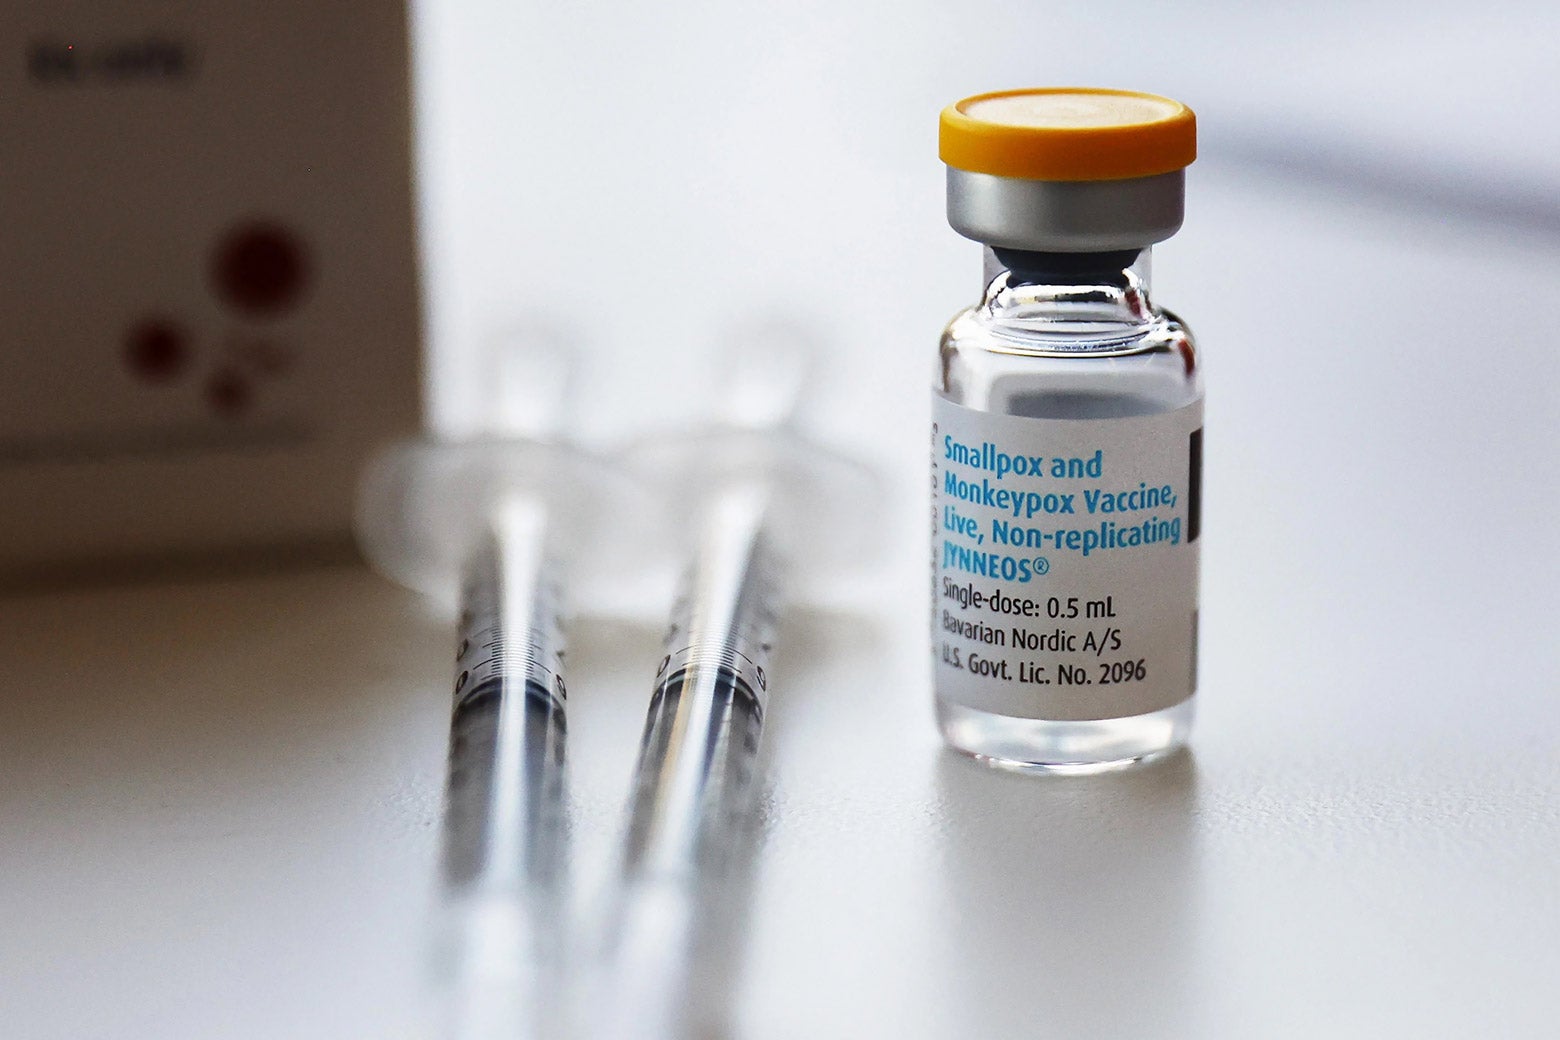 Two syringes sitting next to a vial of monkeypox vaccine.